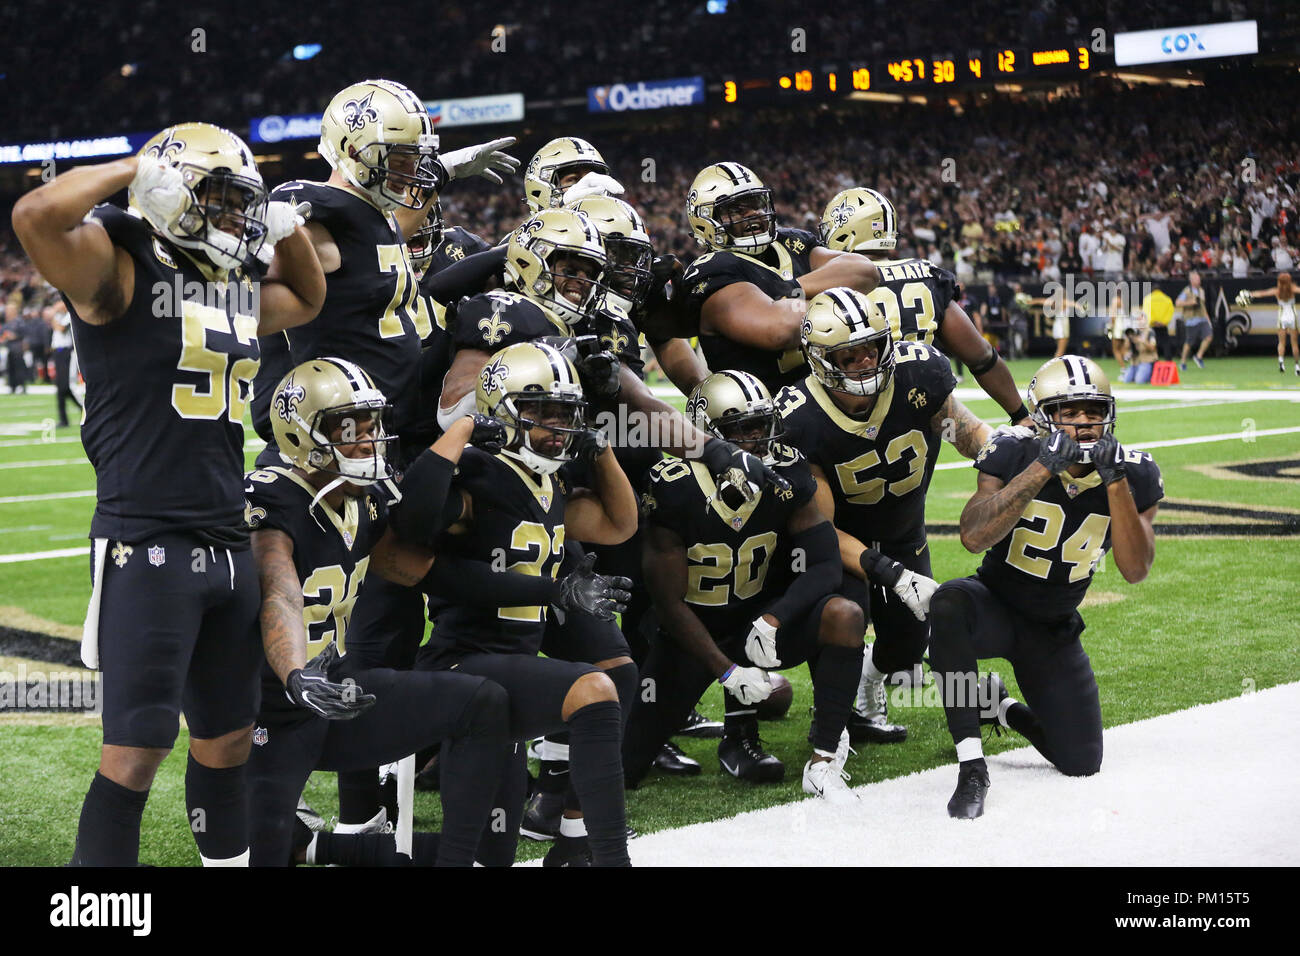 New Orleans, LOUISIANA, USA. 16th Sep, 2018. The New Orleans Saints defense posses after New Orleans Saints defensive back Marcus Williams intercepted the ball from the Cleveland Browns in New Orleans, Louisiana USA on September 16, 2018. The Saints beat the Browns 21-18. Credit: Dan Anderson/ZUMA Wire/Alamy Live News Stock Photo